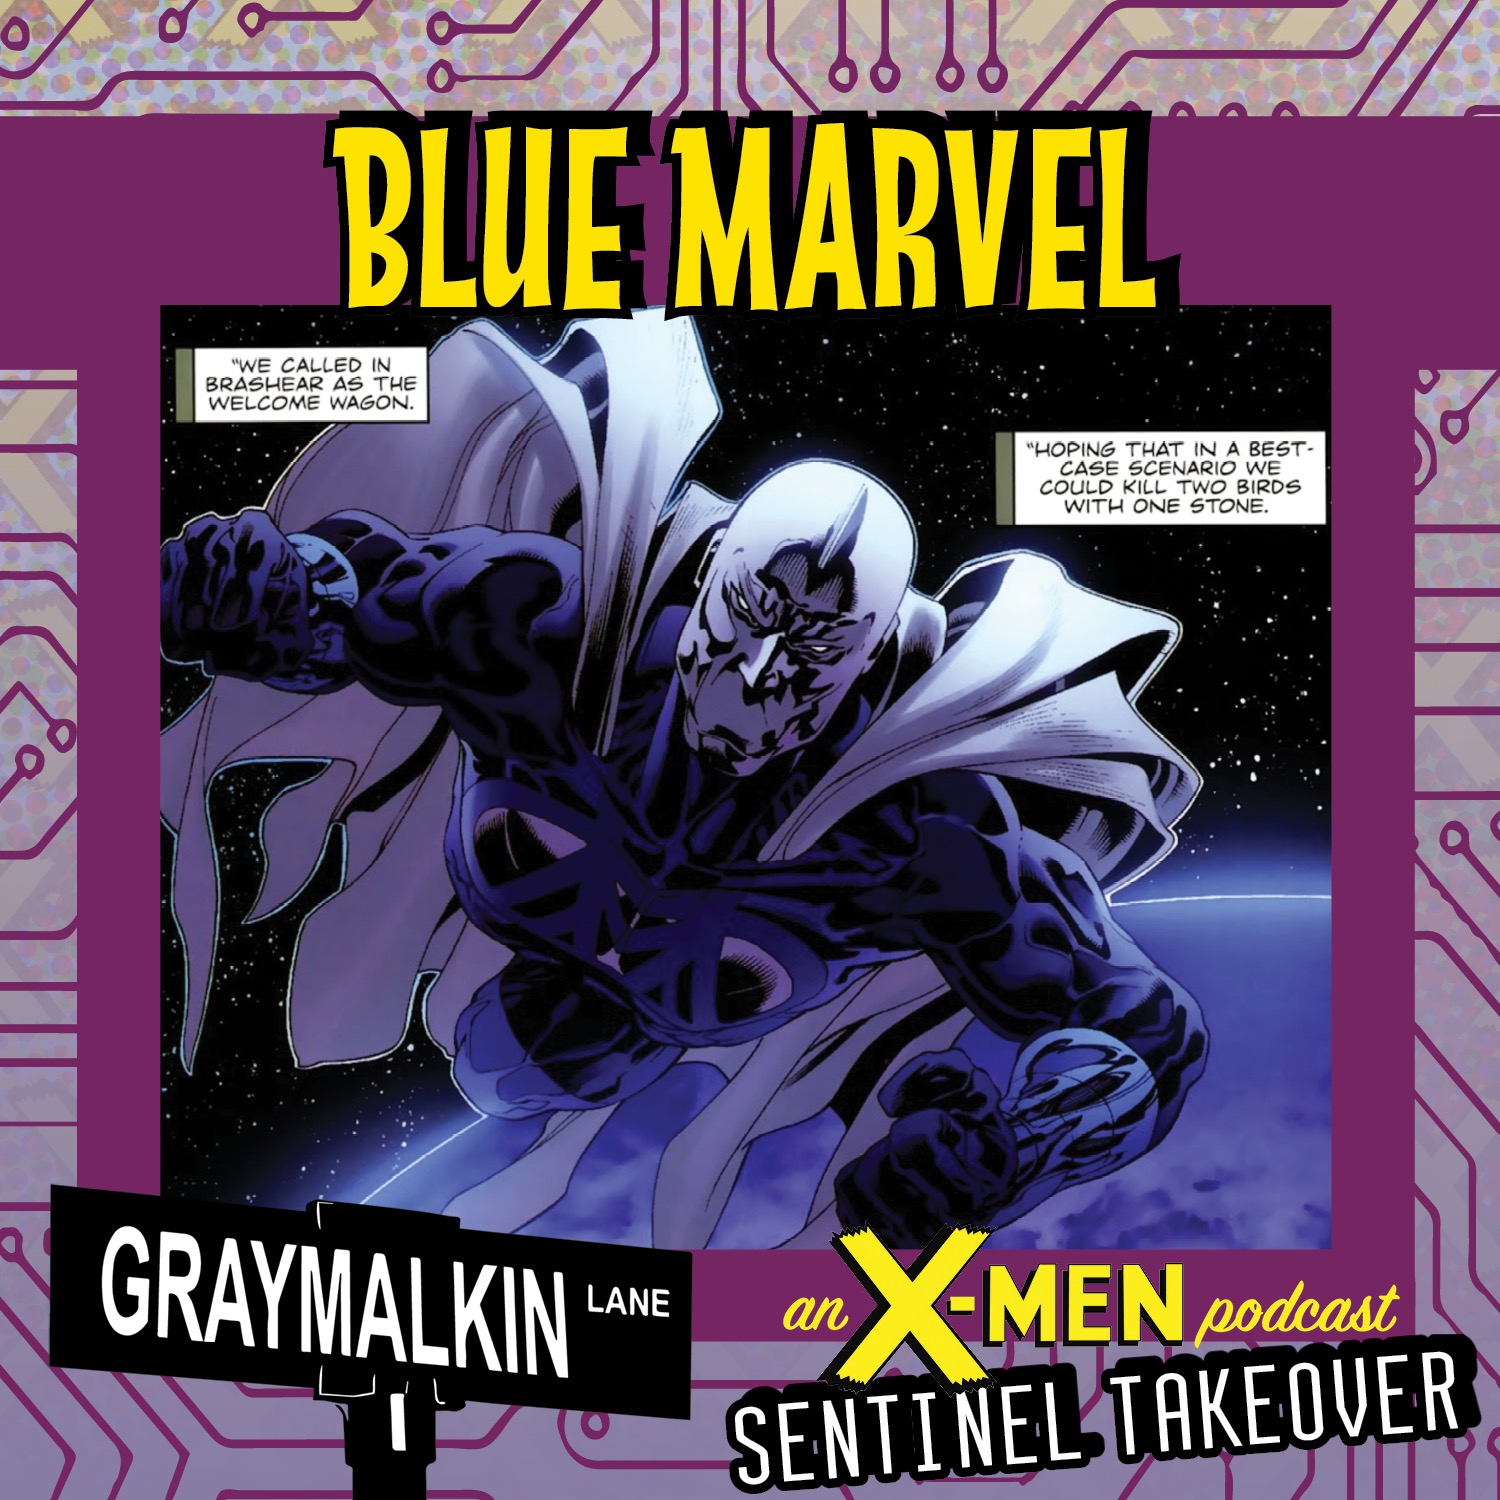 Legend of the Blue Marvel 1-5: Featuring Ajuan Mance, Steenz, and Darrell Taylor!